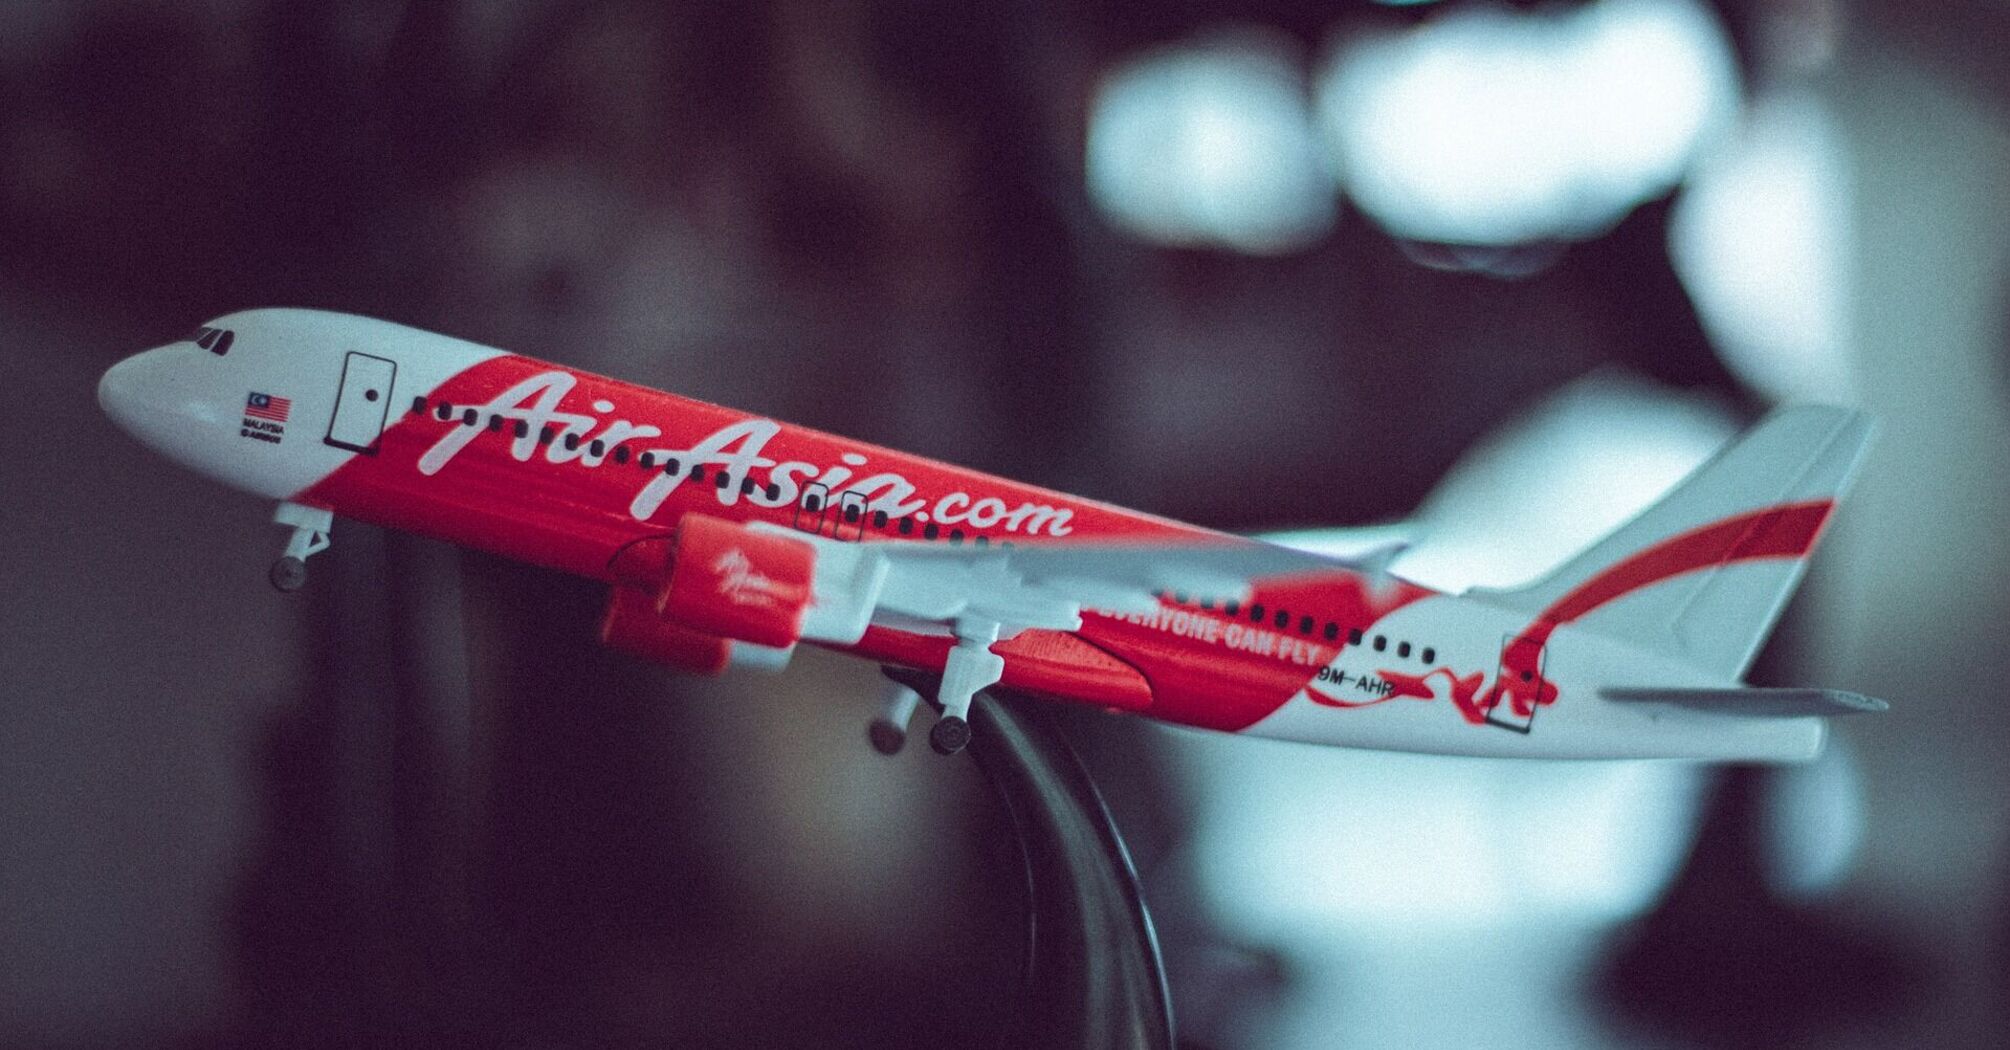 A model of an AirAsia airplane with a red and white livery on a blurred background